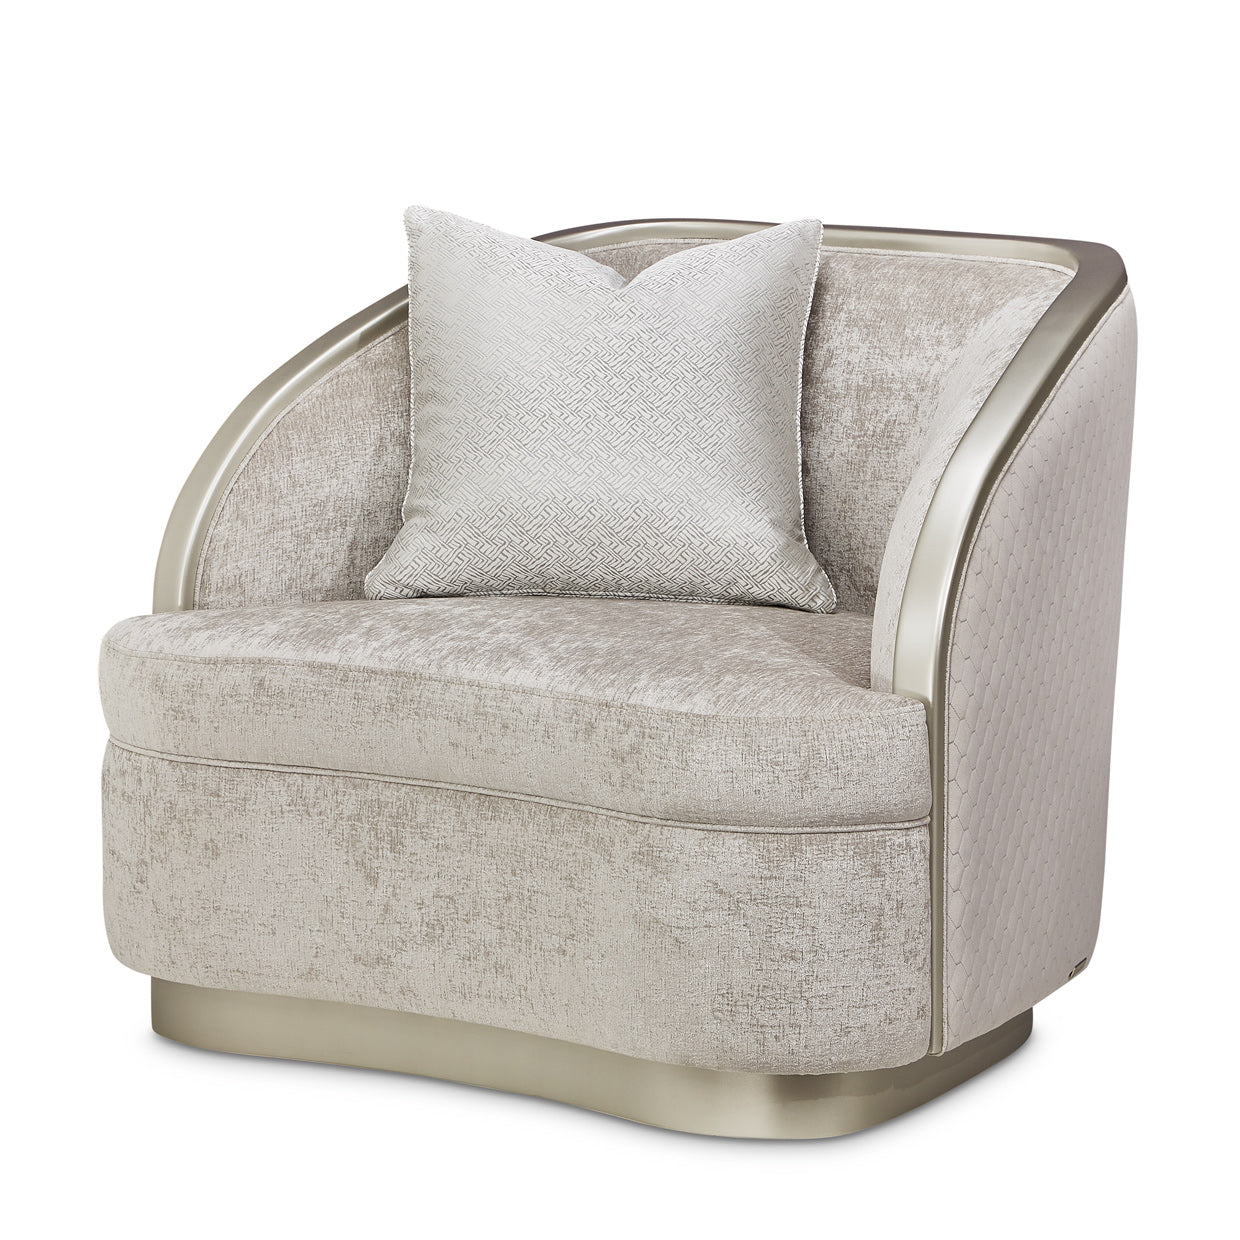 LANNA, Matching Chair ,Storm, Silver Mist,Chenille upholstery, Quilted velvet, Honeycomb pattern, Platinum finish, Accent pillow, dream art , michael amini